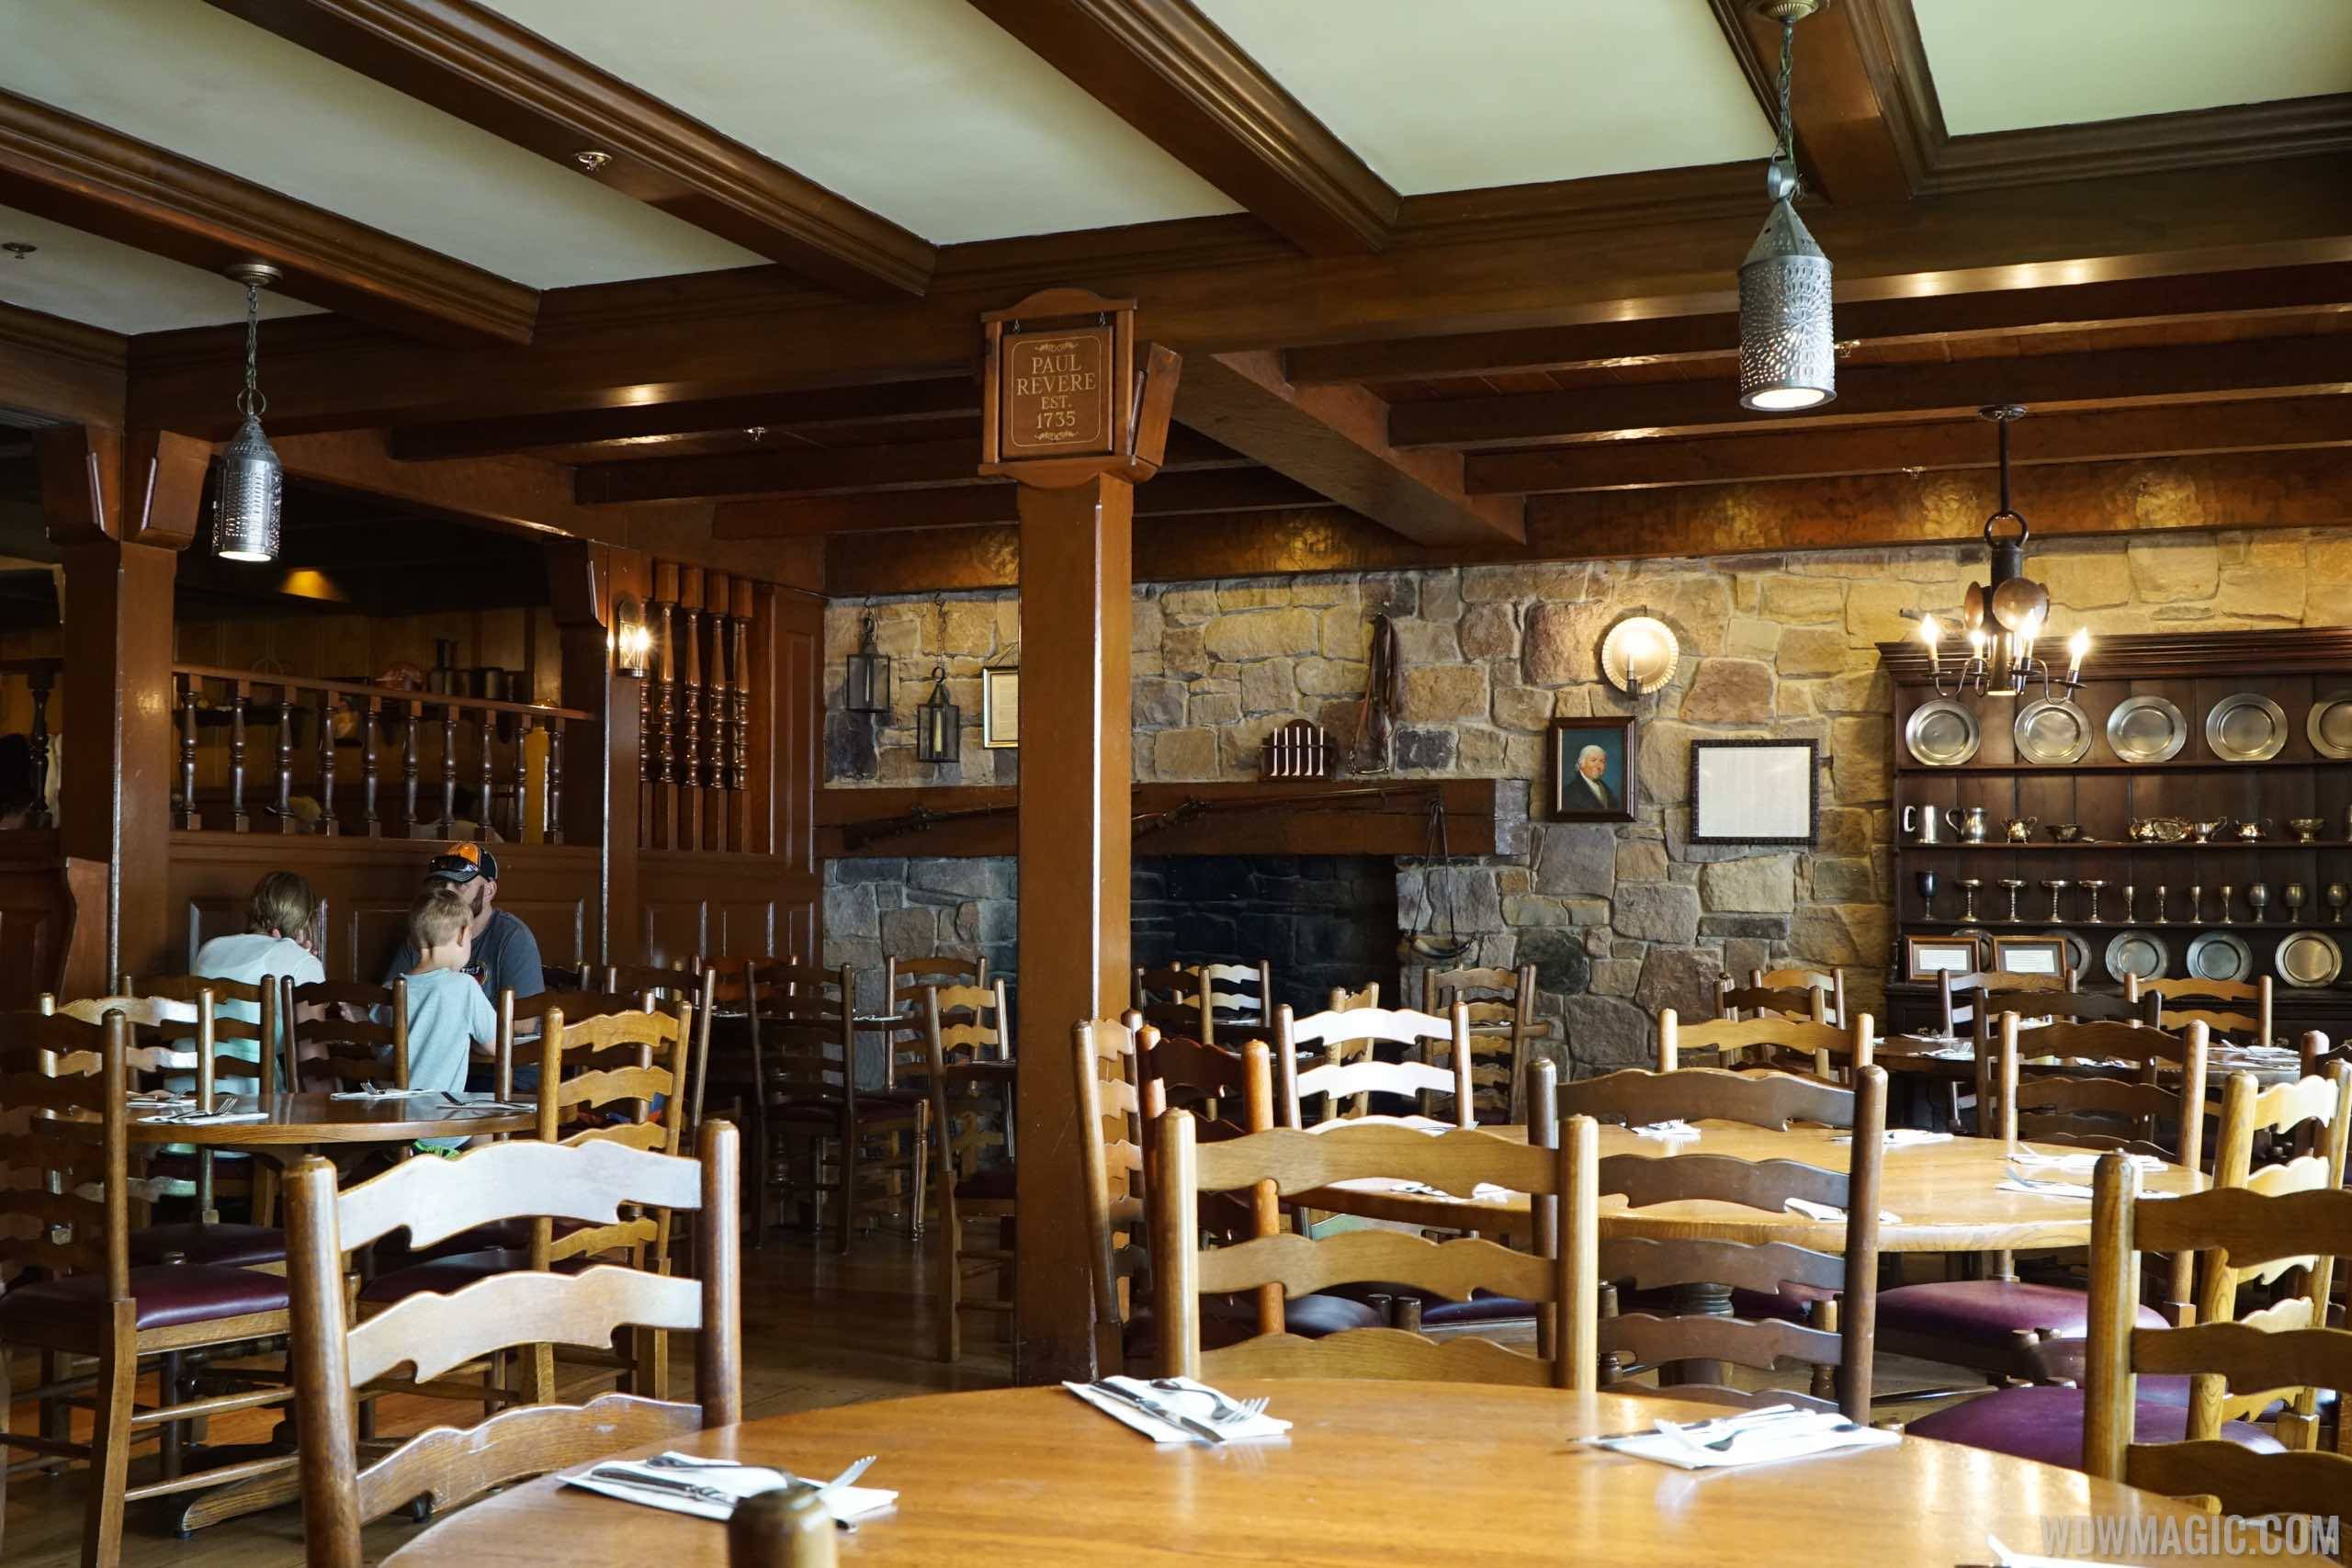 Liberty Tree Tavern offering character dining during the Crystal Palace refurbishment